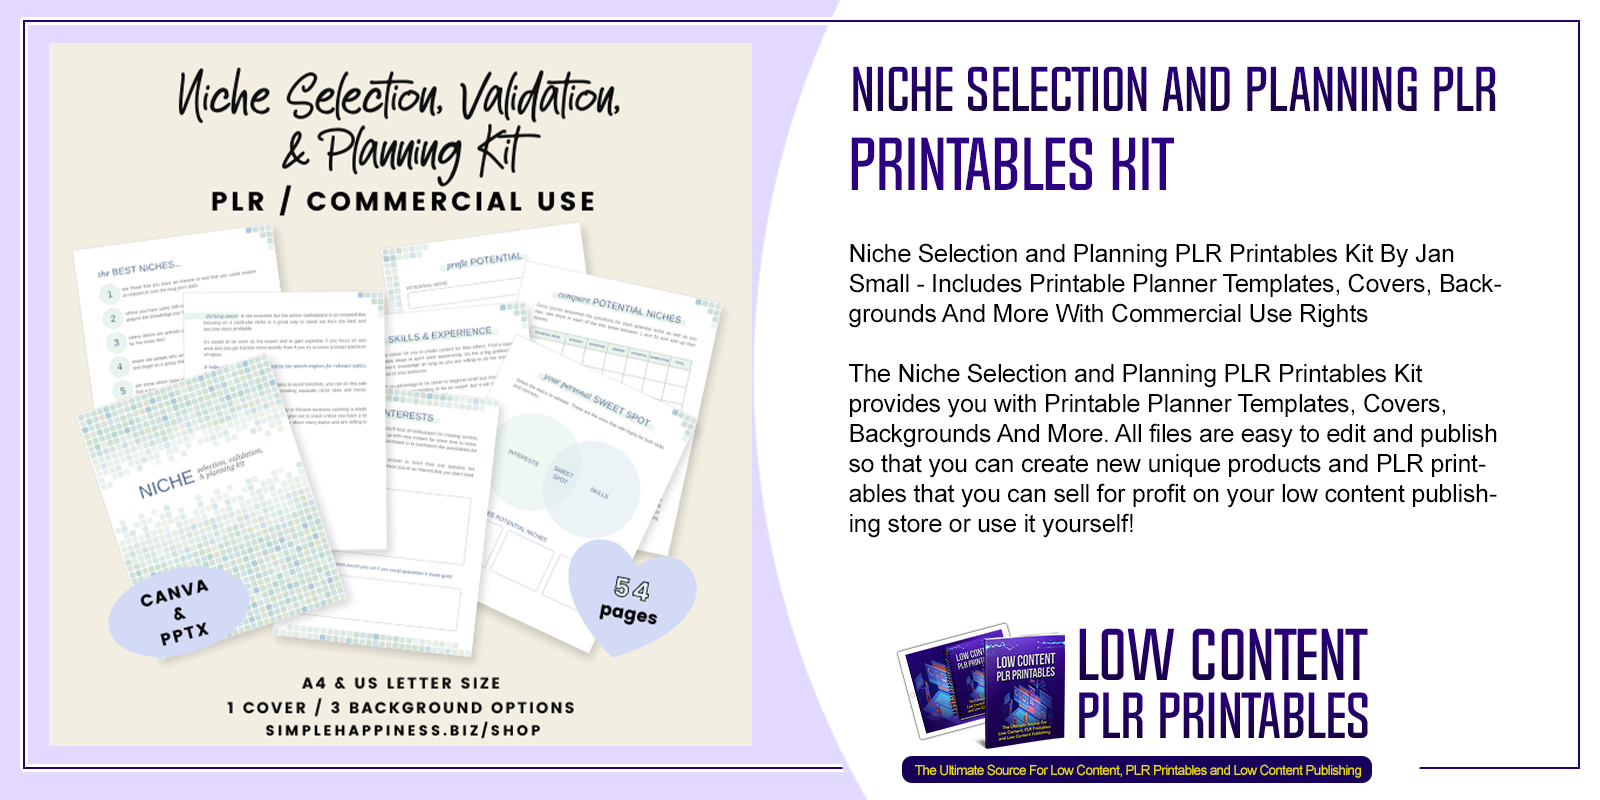 Niche Selection and Planning PLR Printables Kit